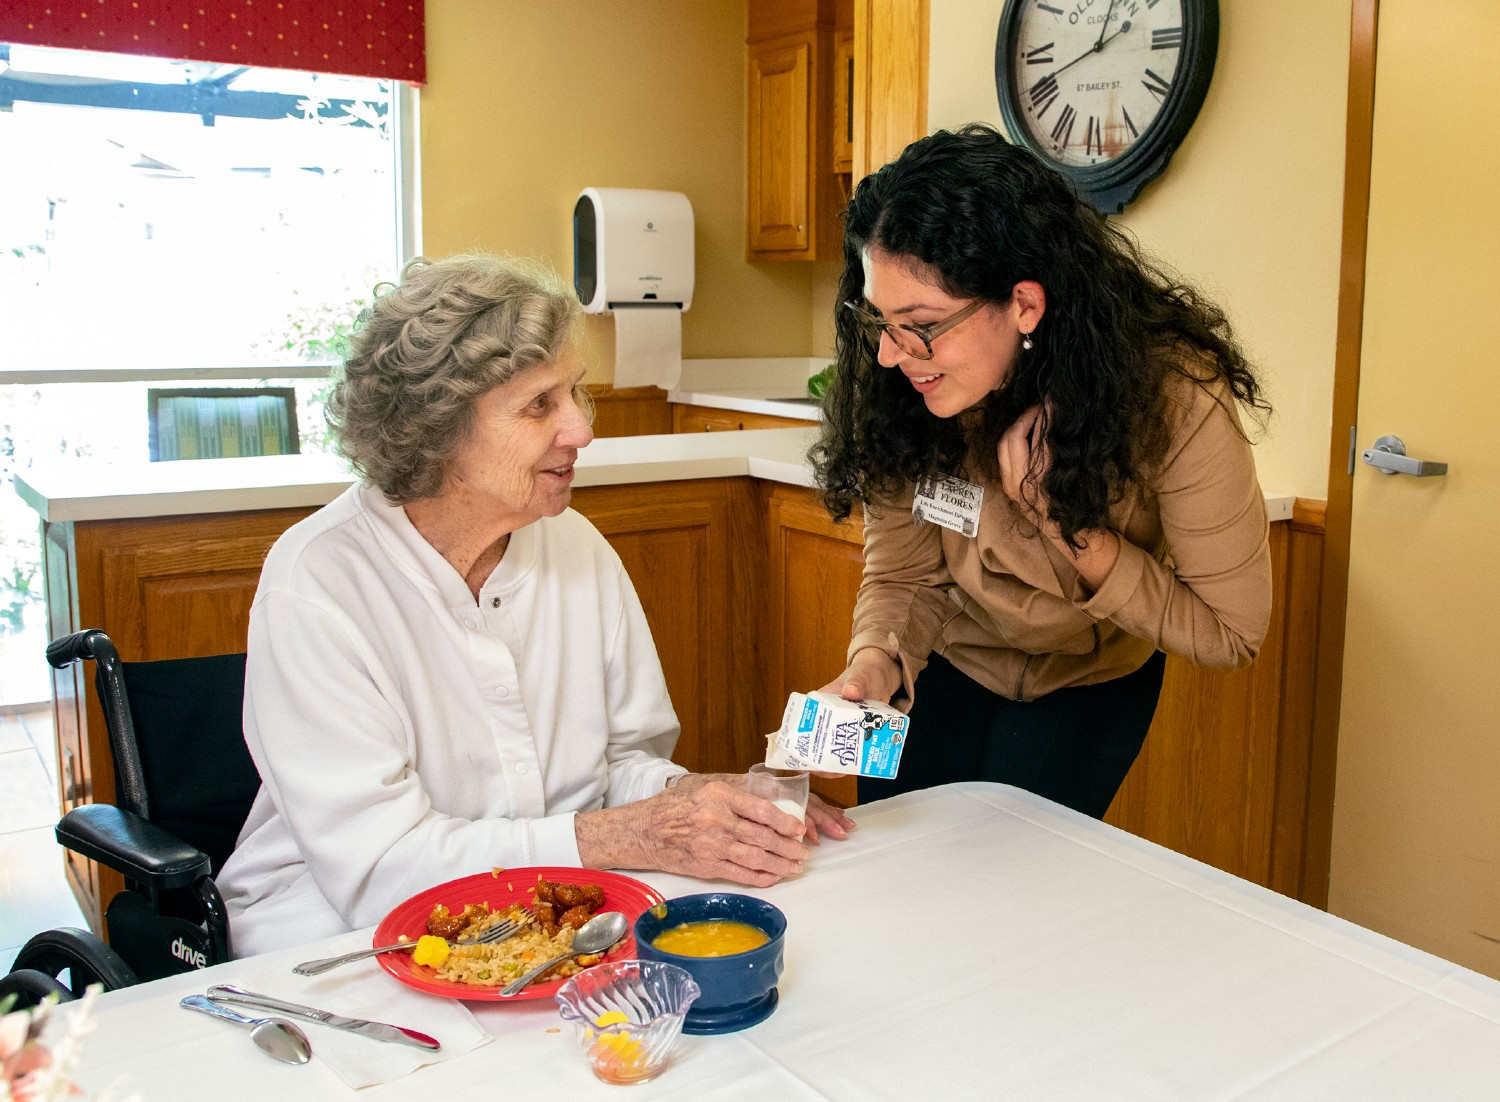 Magnolia Grove, our skilled nursing community, provides a caring home for residents and community members.